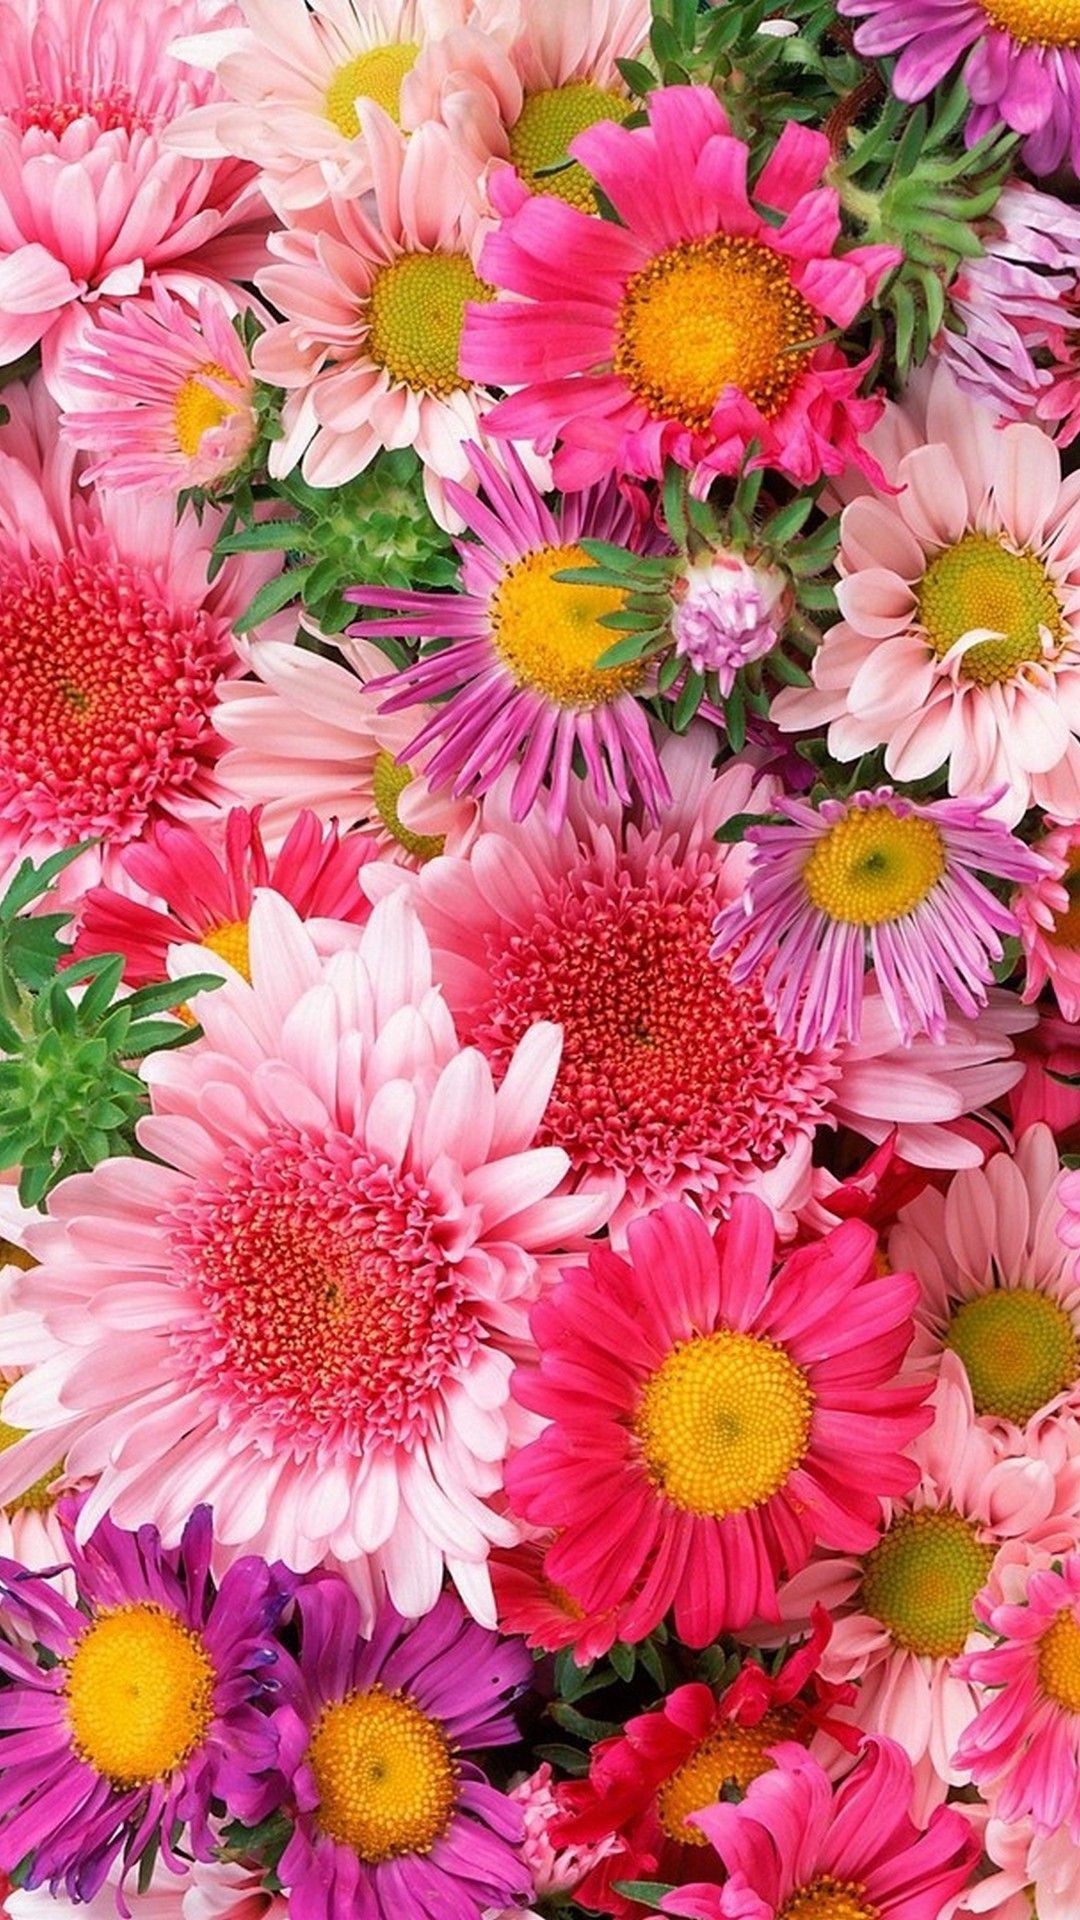 1080x1920 Pink Flower Background For Android is best high definition wallpaper image  2018. You can use this wallpaper as background for your desktop Computer ...